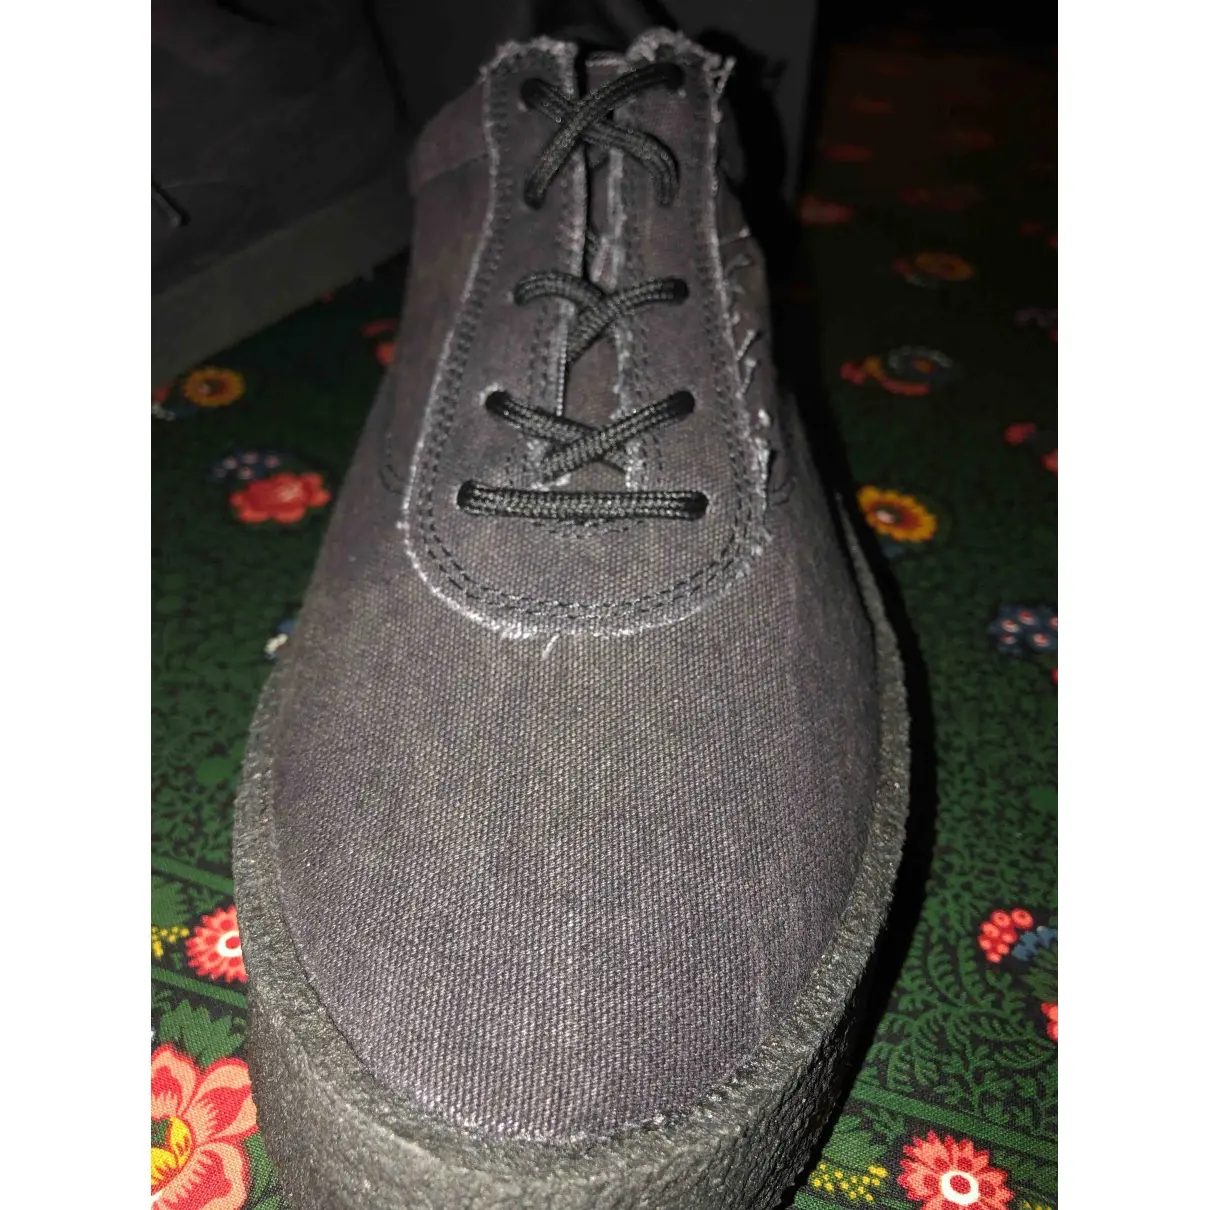 Yeezy Cloth low trainers for sale